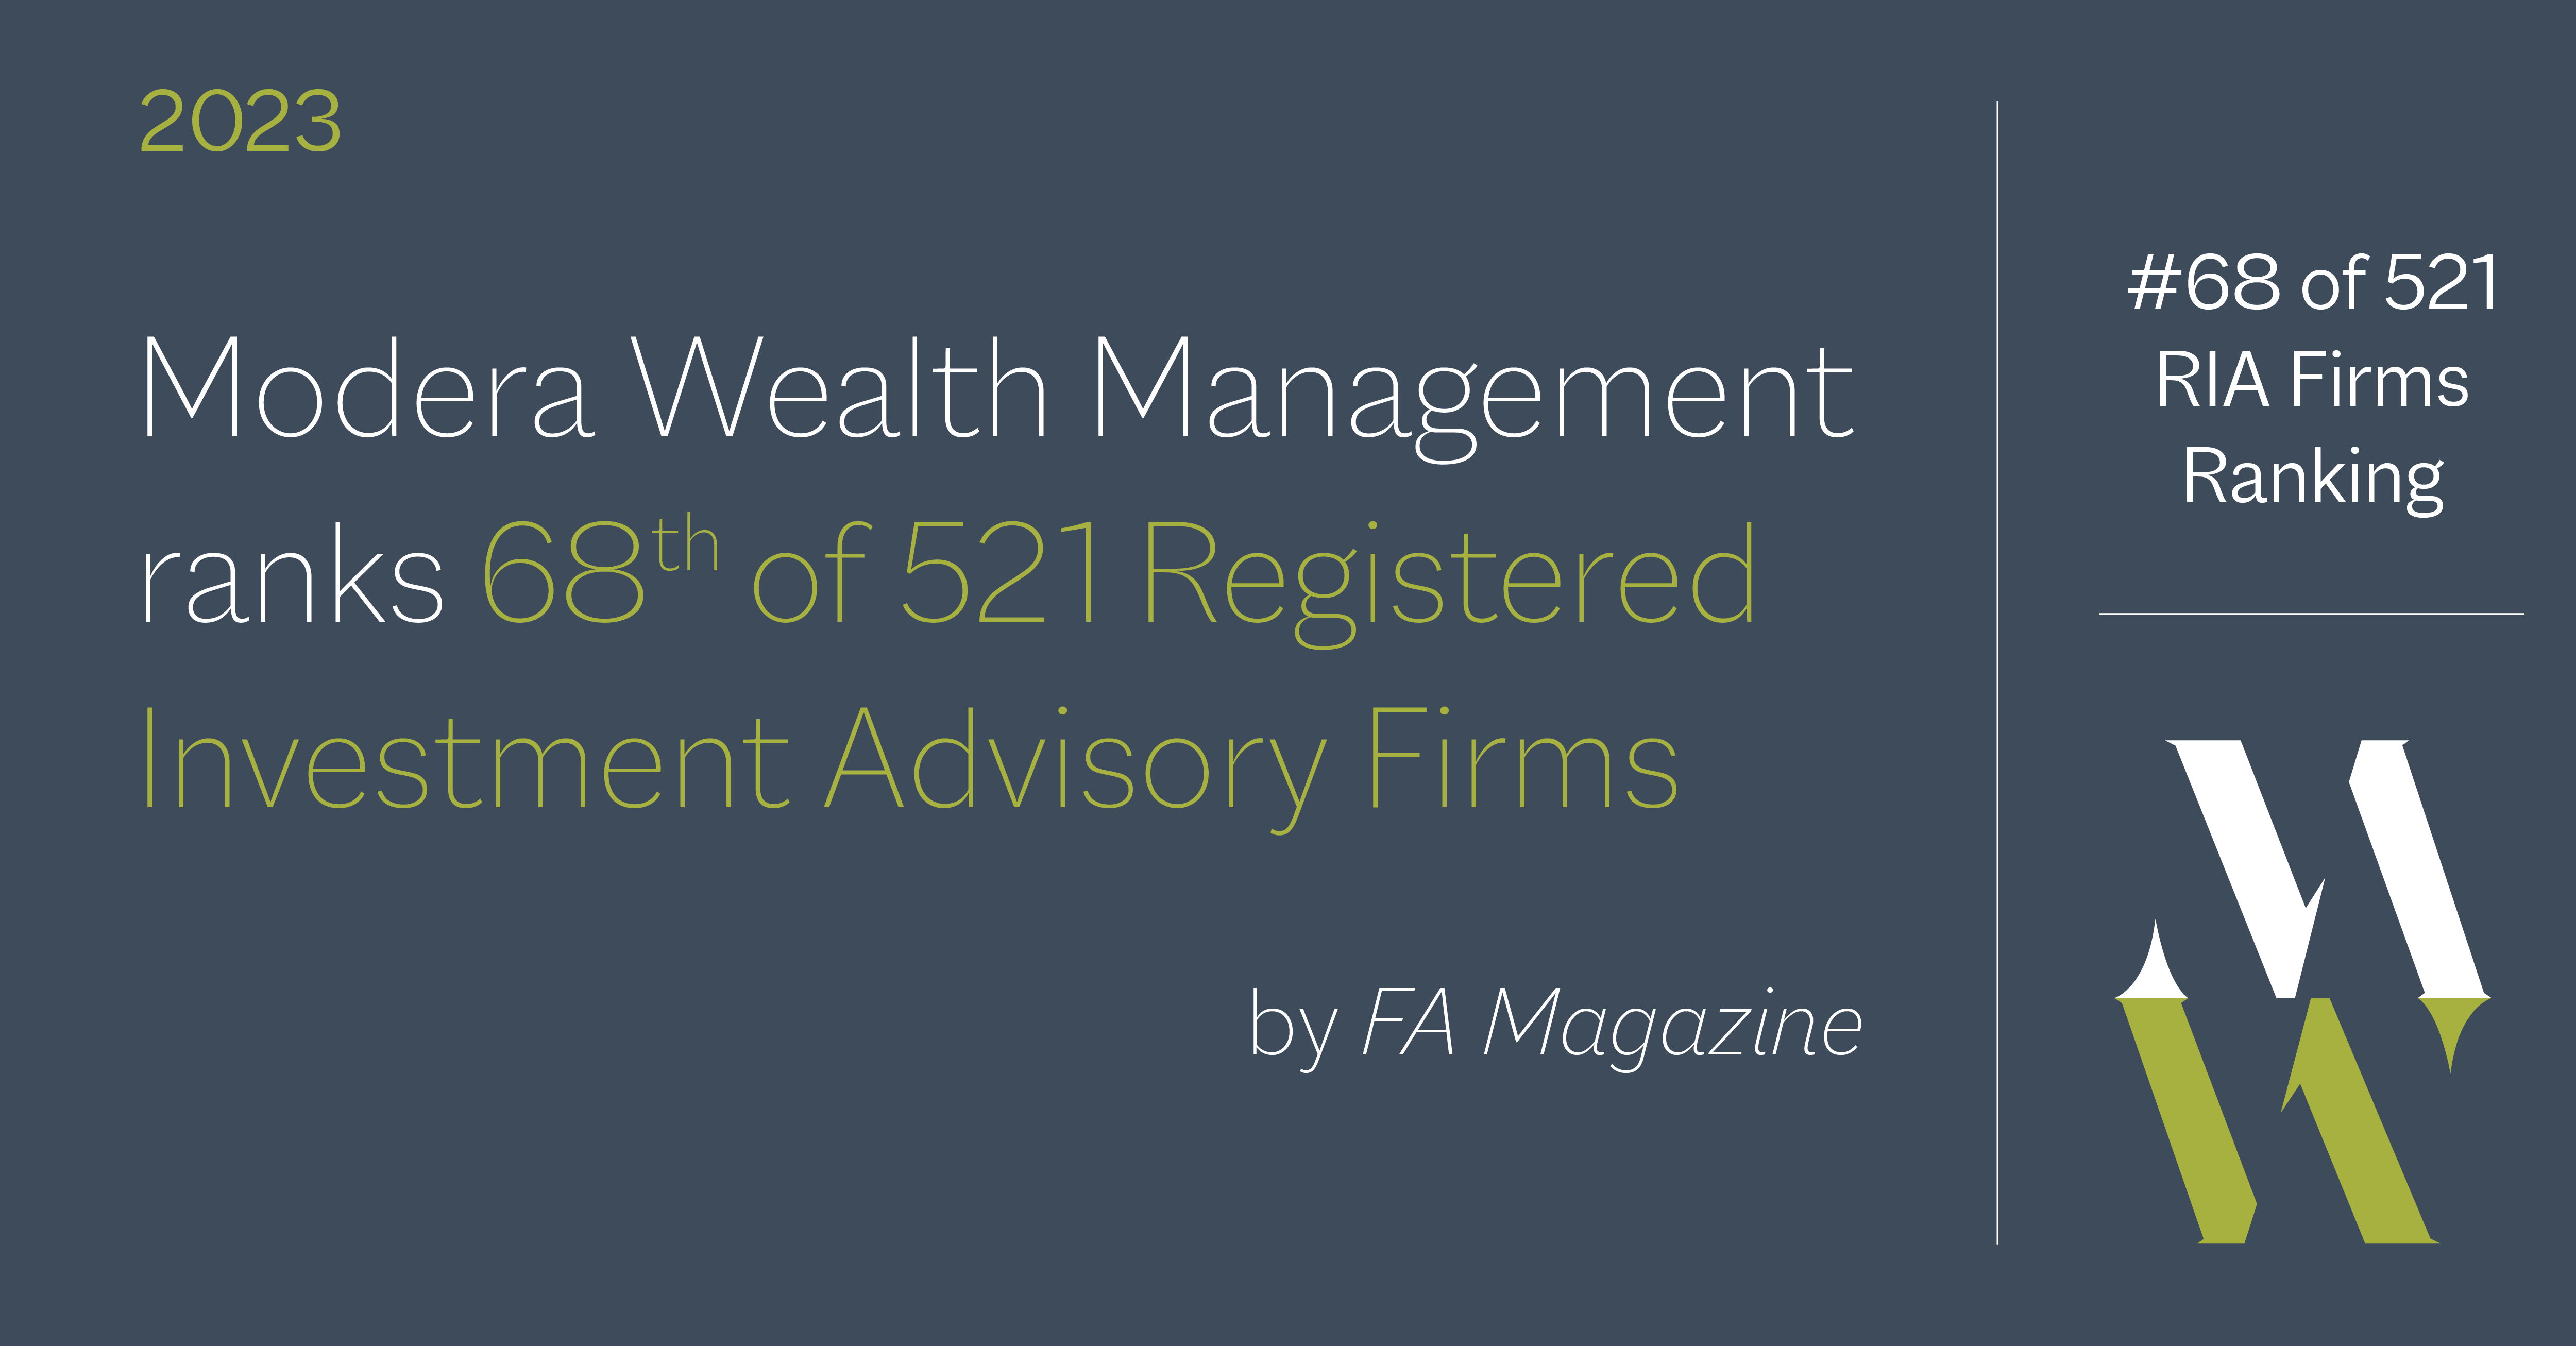 Modera Wealth Management Listed in Financial Advisor (FA) Magazine’s